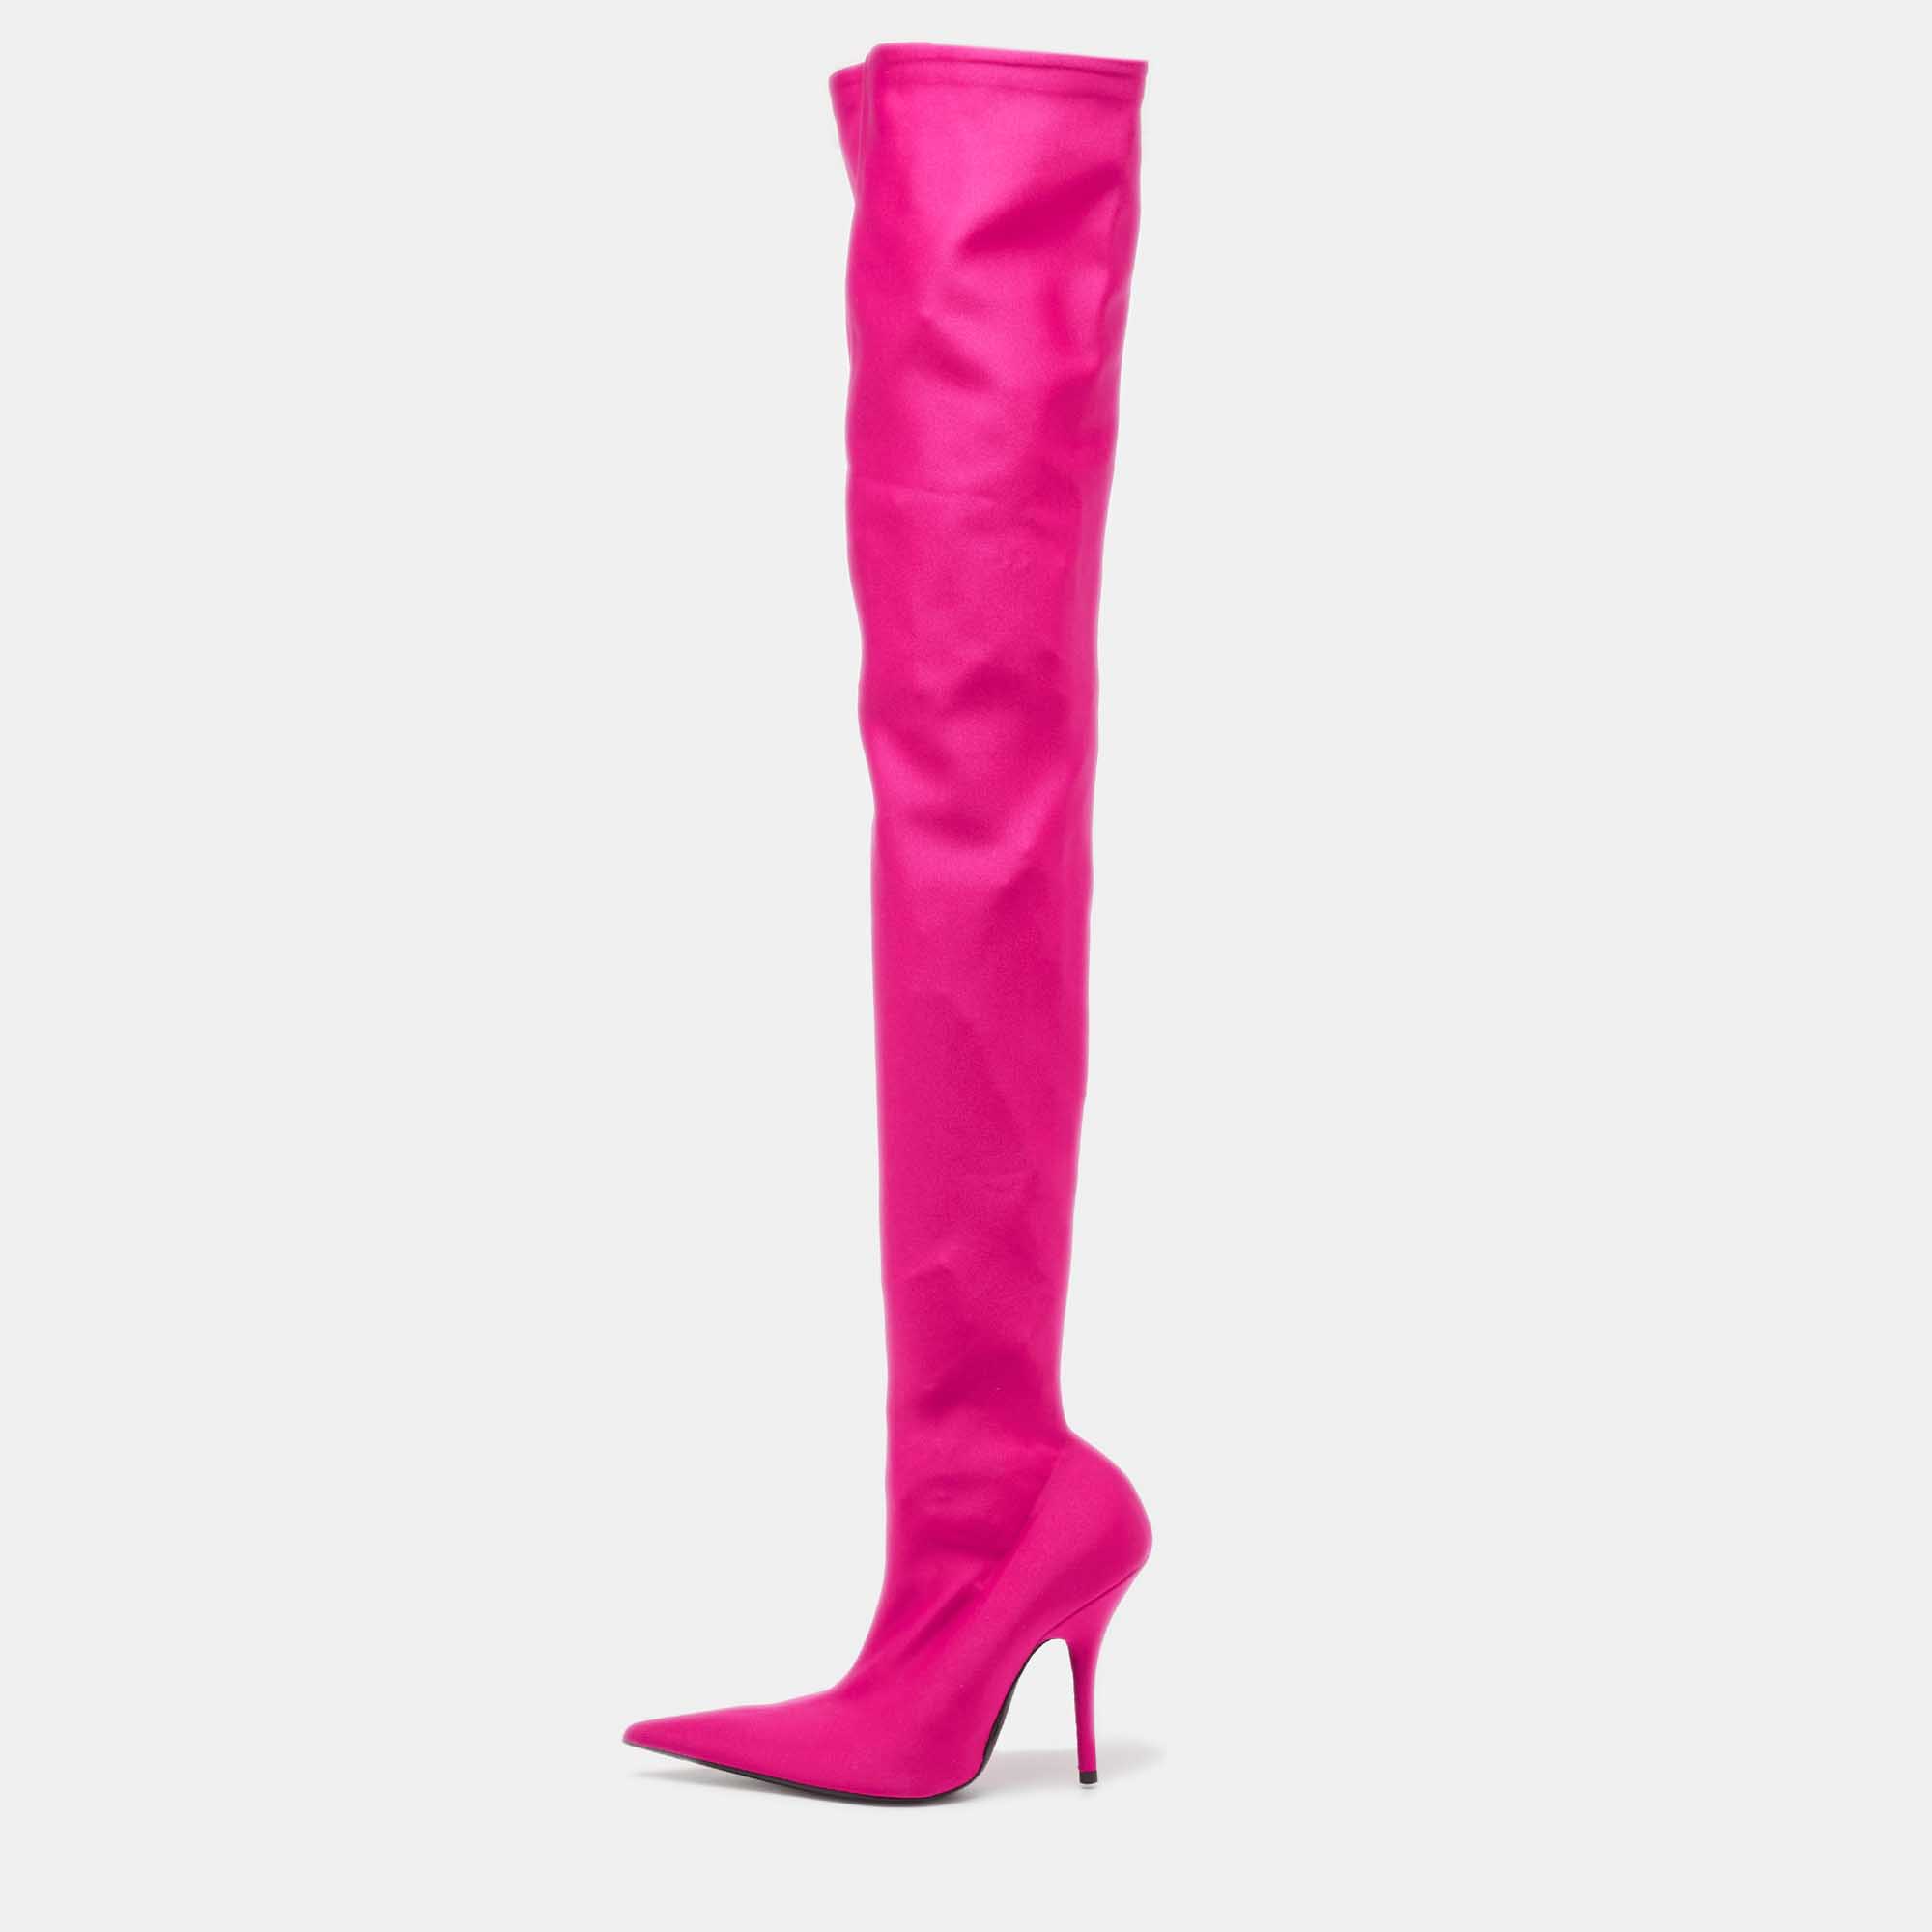 Balenciaga pink satin knife over the knee  boots size 37